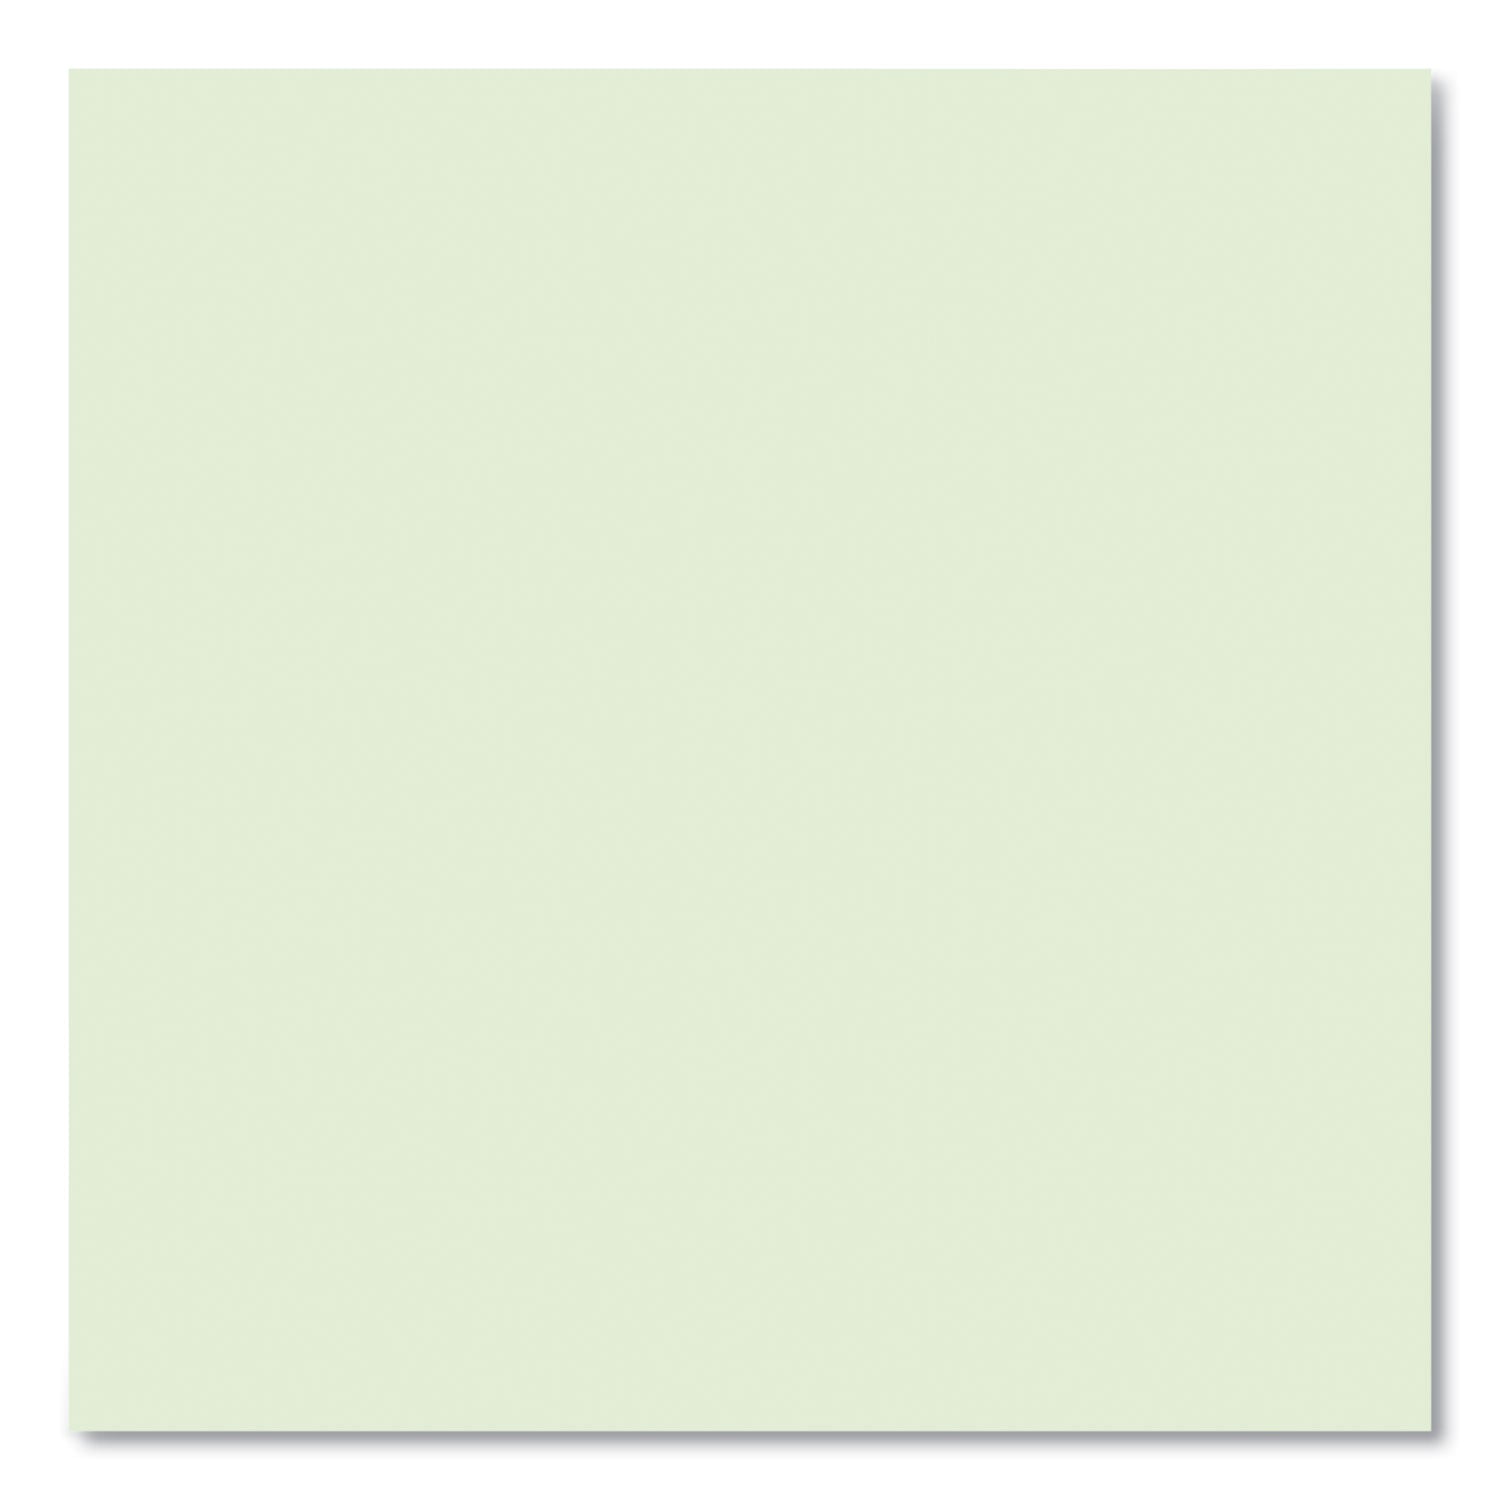 boardroom-series-steno-pad-gregg-ruled-brown-cover-80-green-6-x-9-sheets-72-pads-carton-ships-in-4-6-business-days_roa12103cs - 4